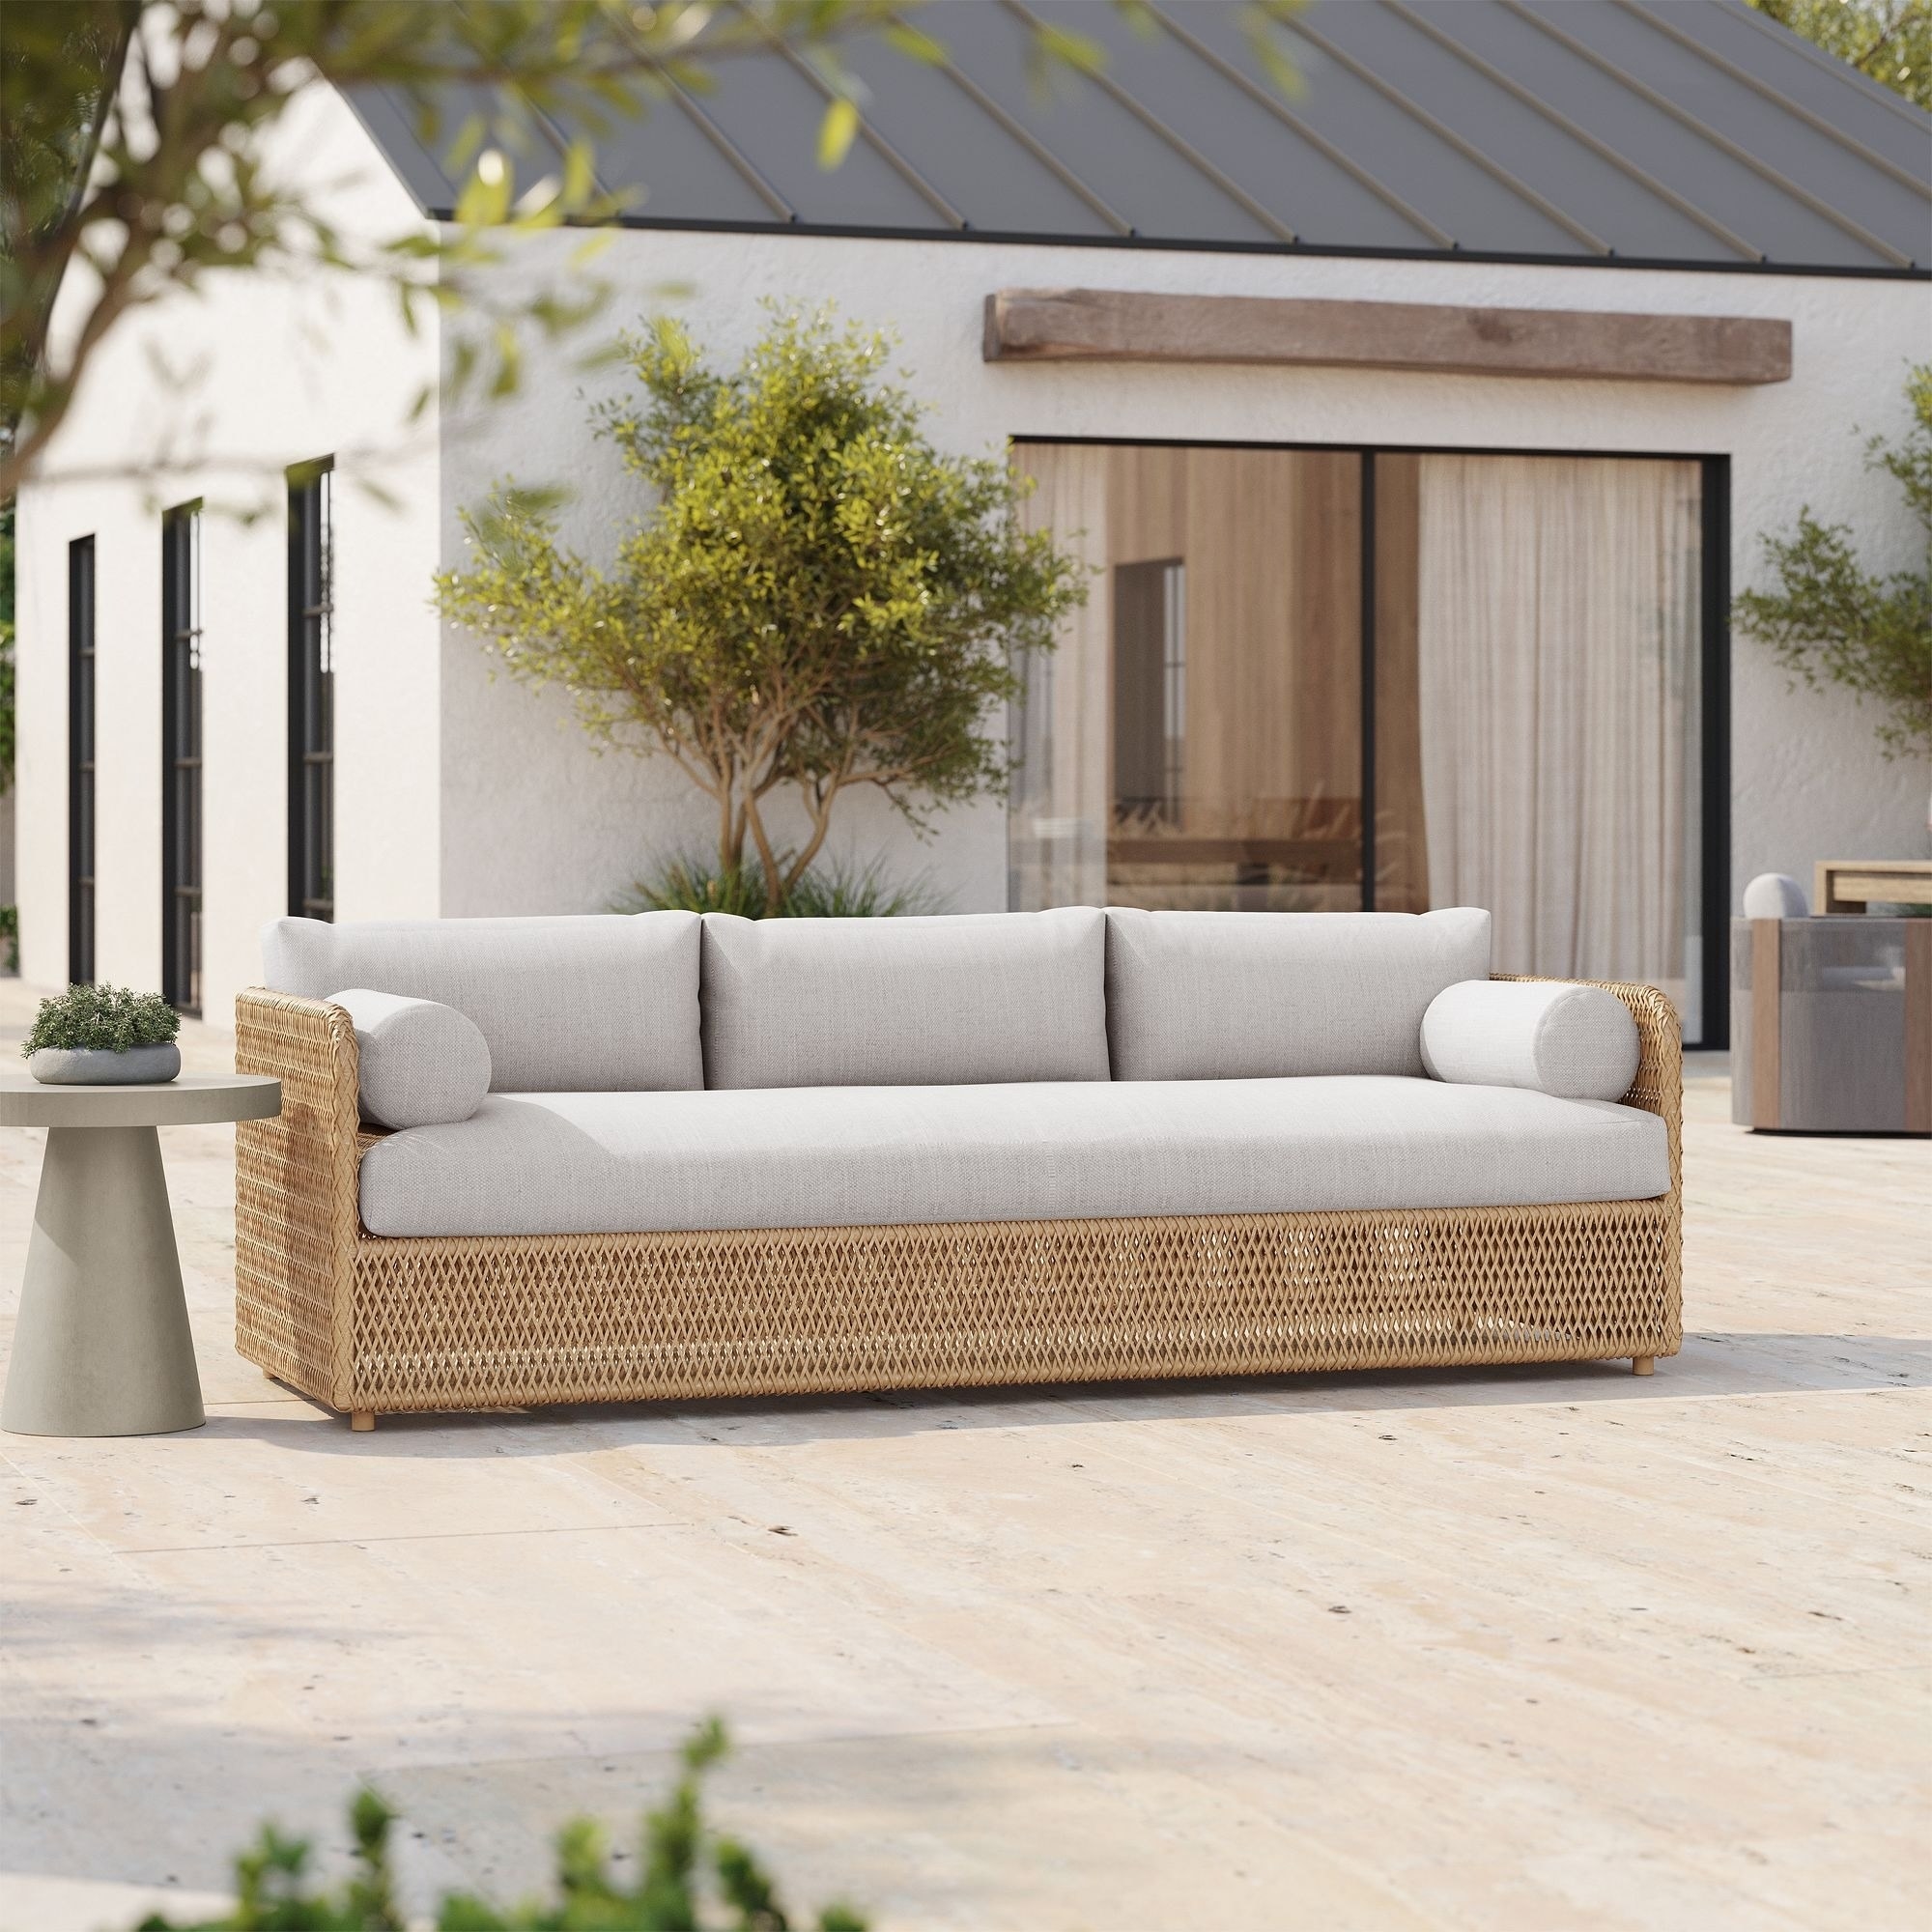 15 Best Outdoor Sofas For Backyards and Patios 2023 photo